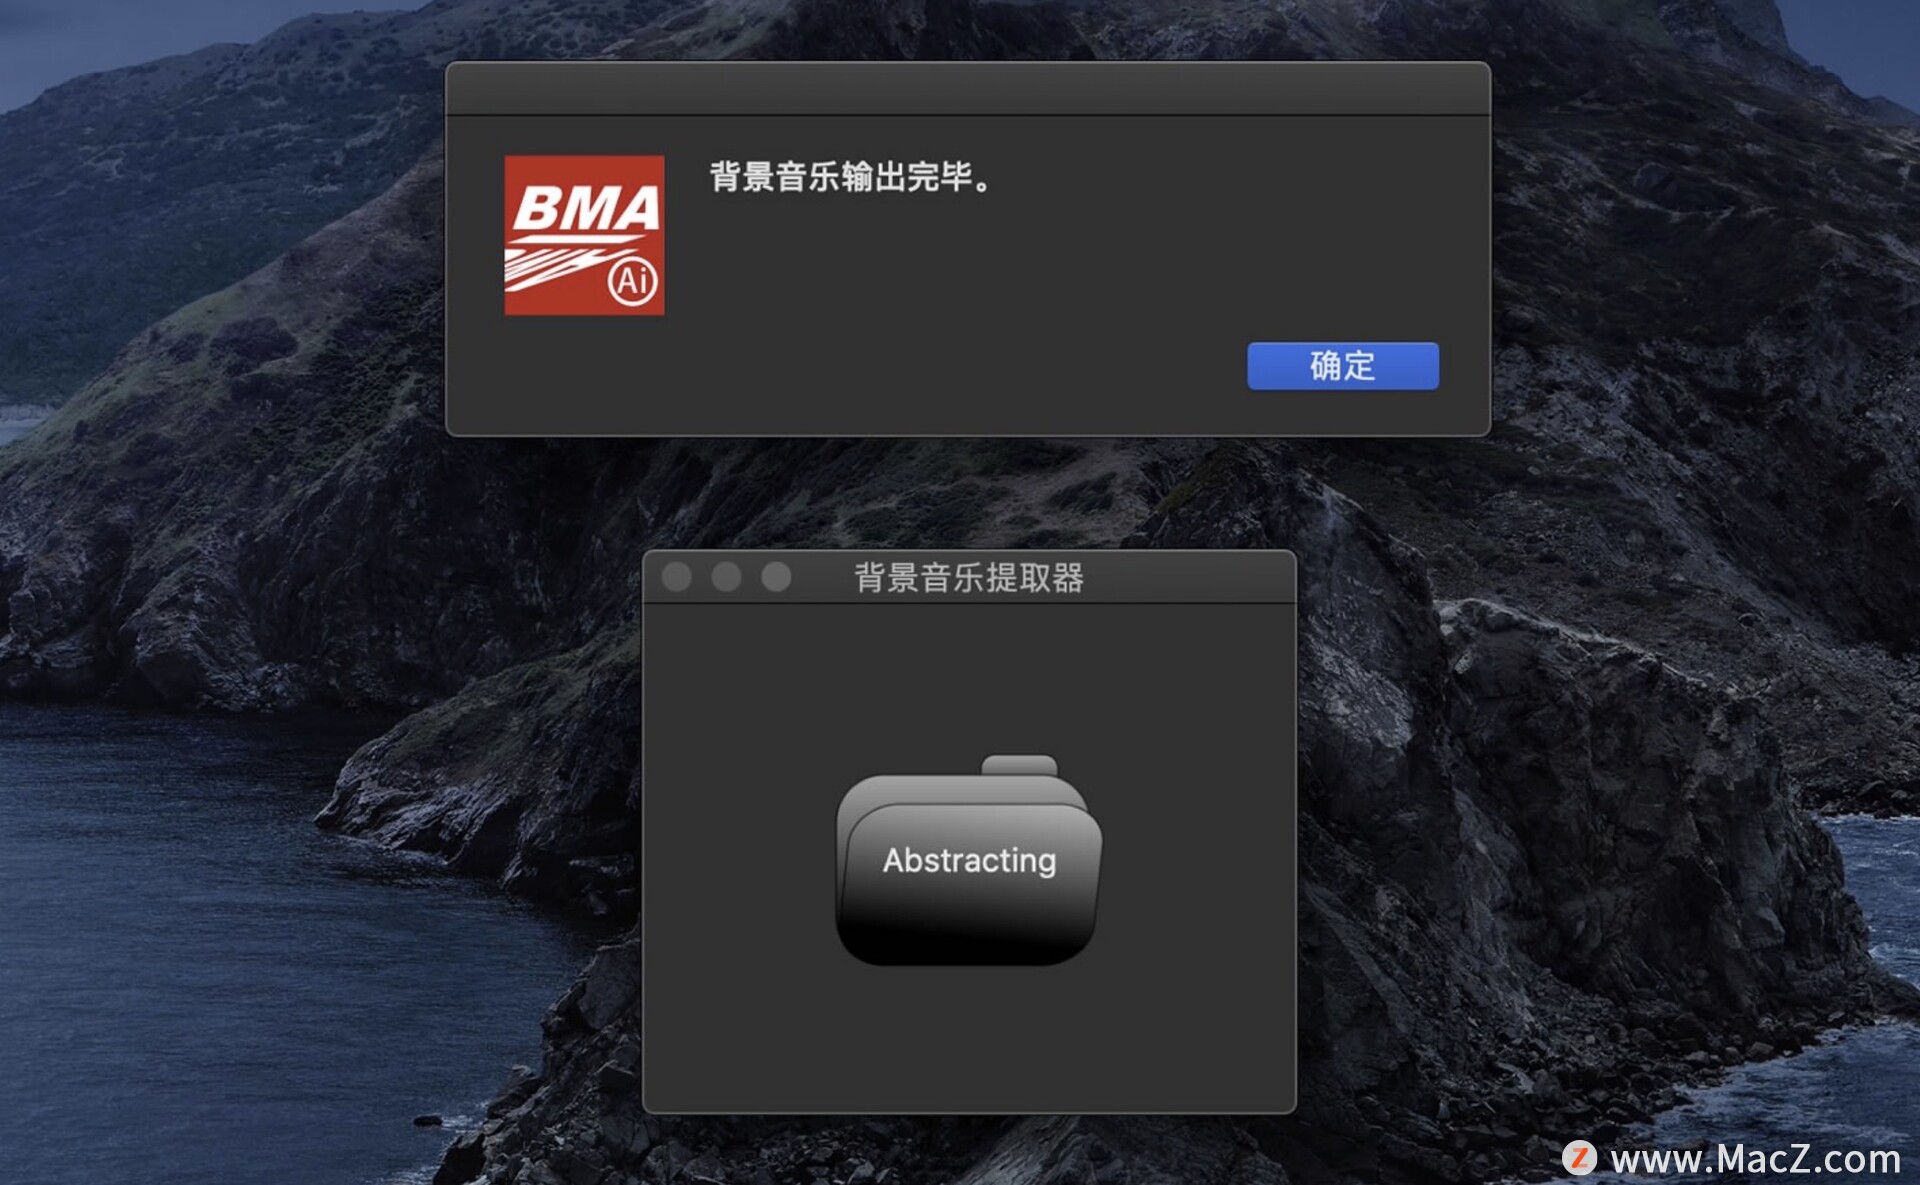 Background Music Abstractor下载-Background Music Abstractor for mac(背景音乐提取器)- Mac下载插图3